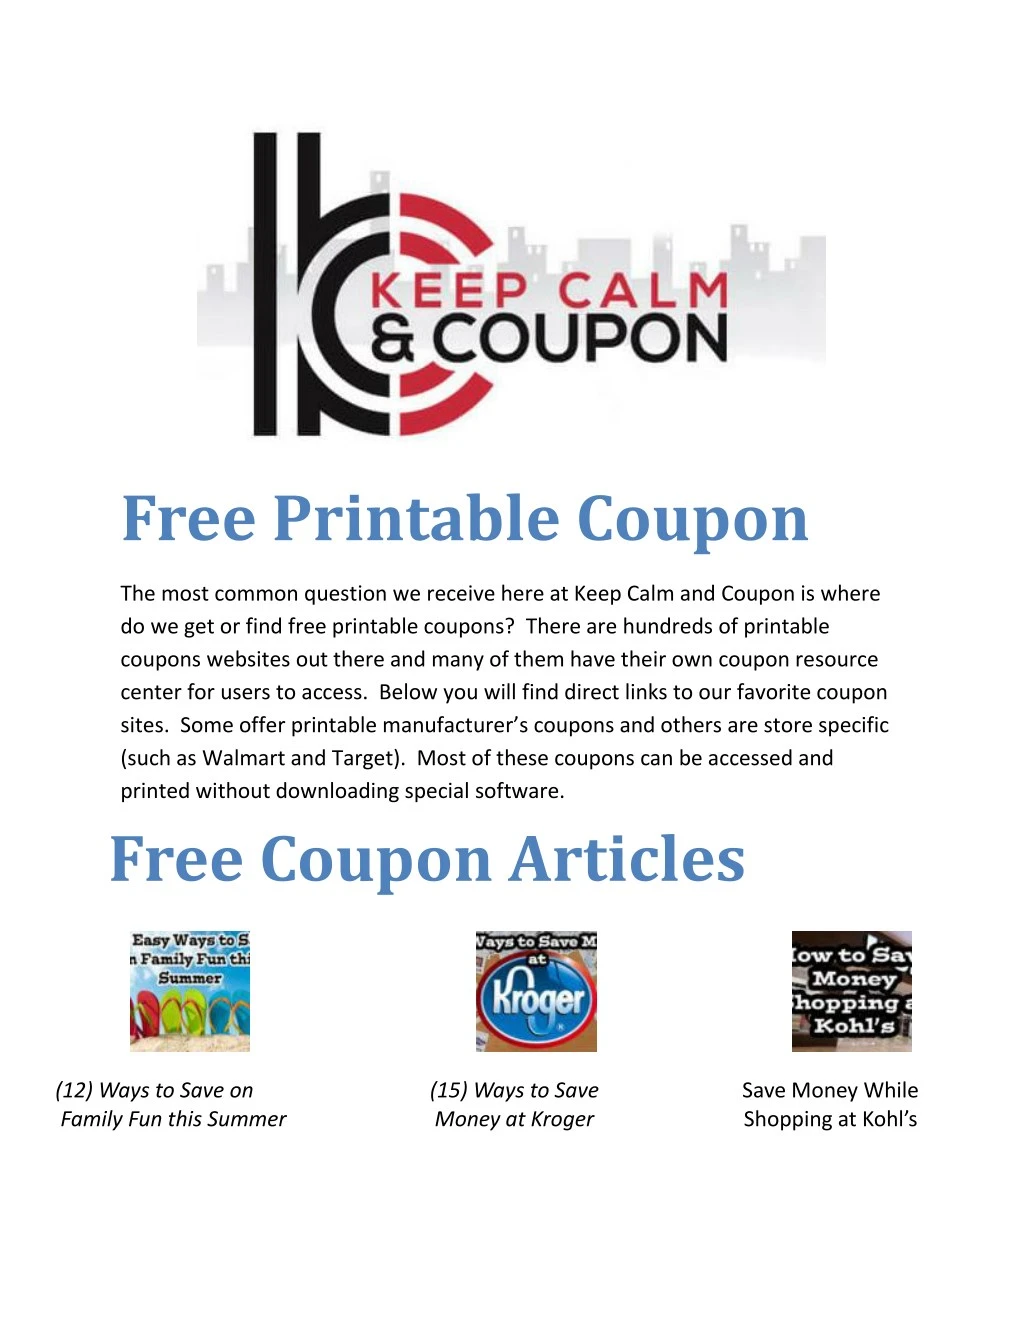 free printable coupon the most common question